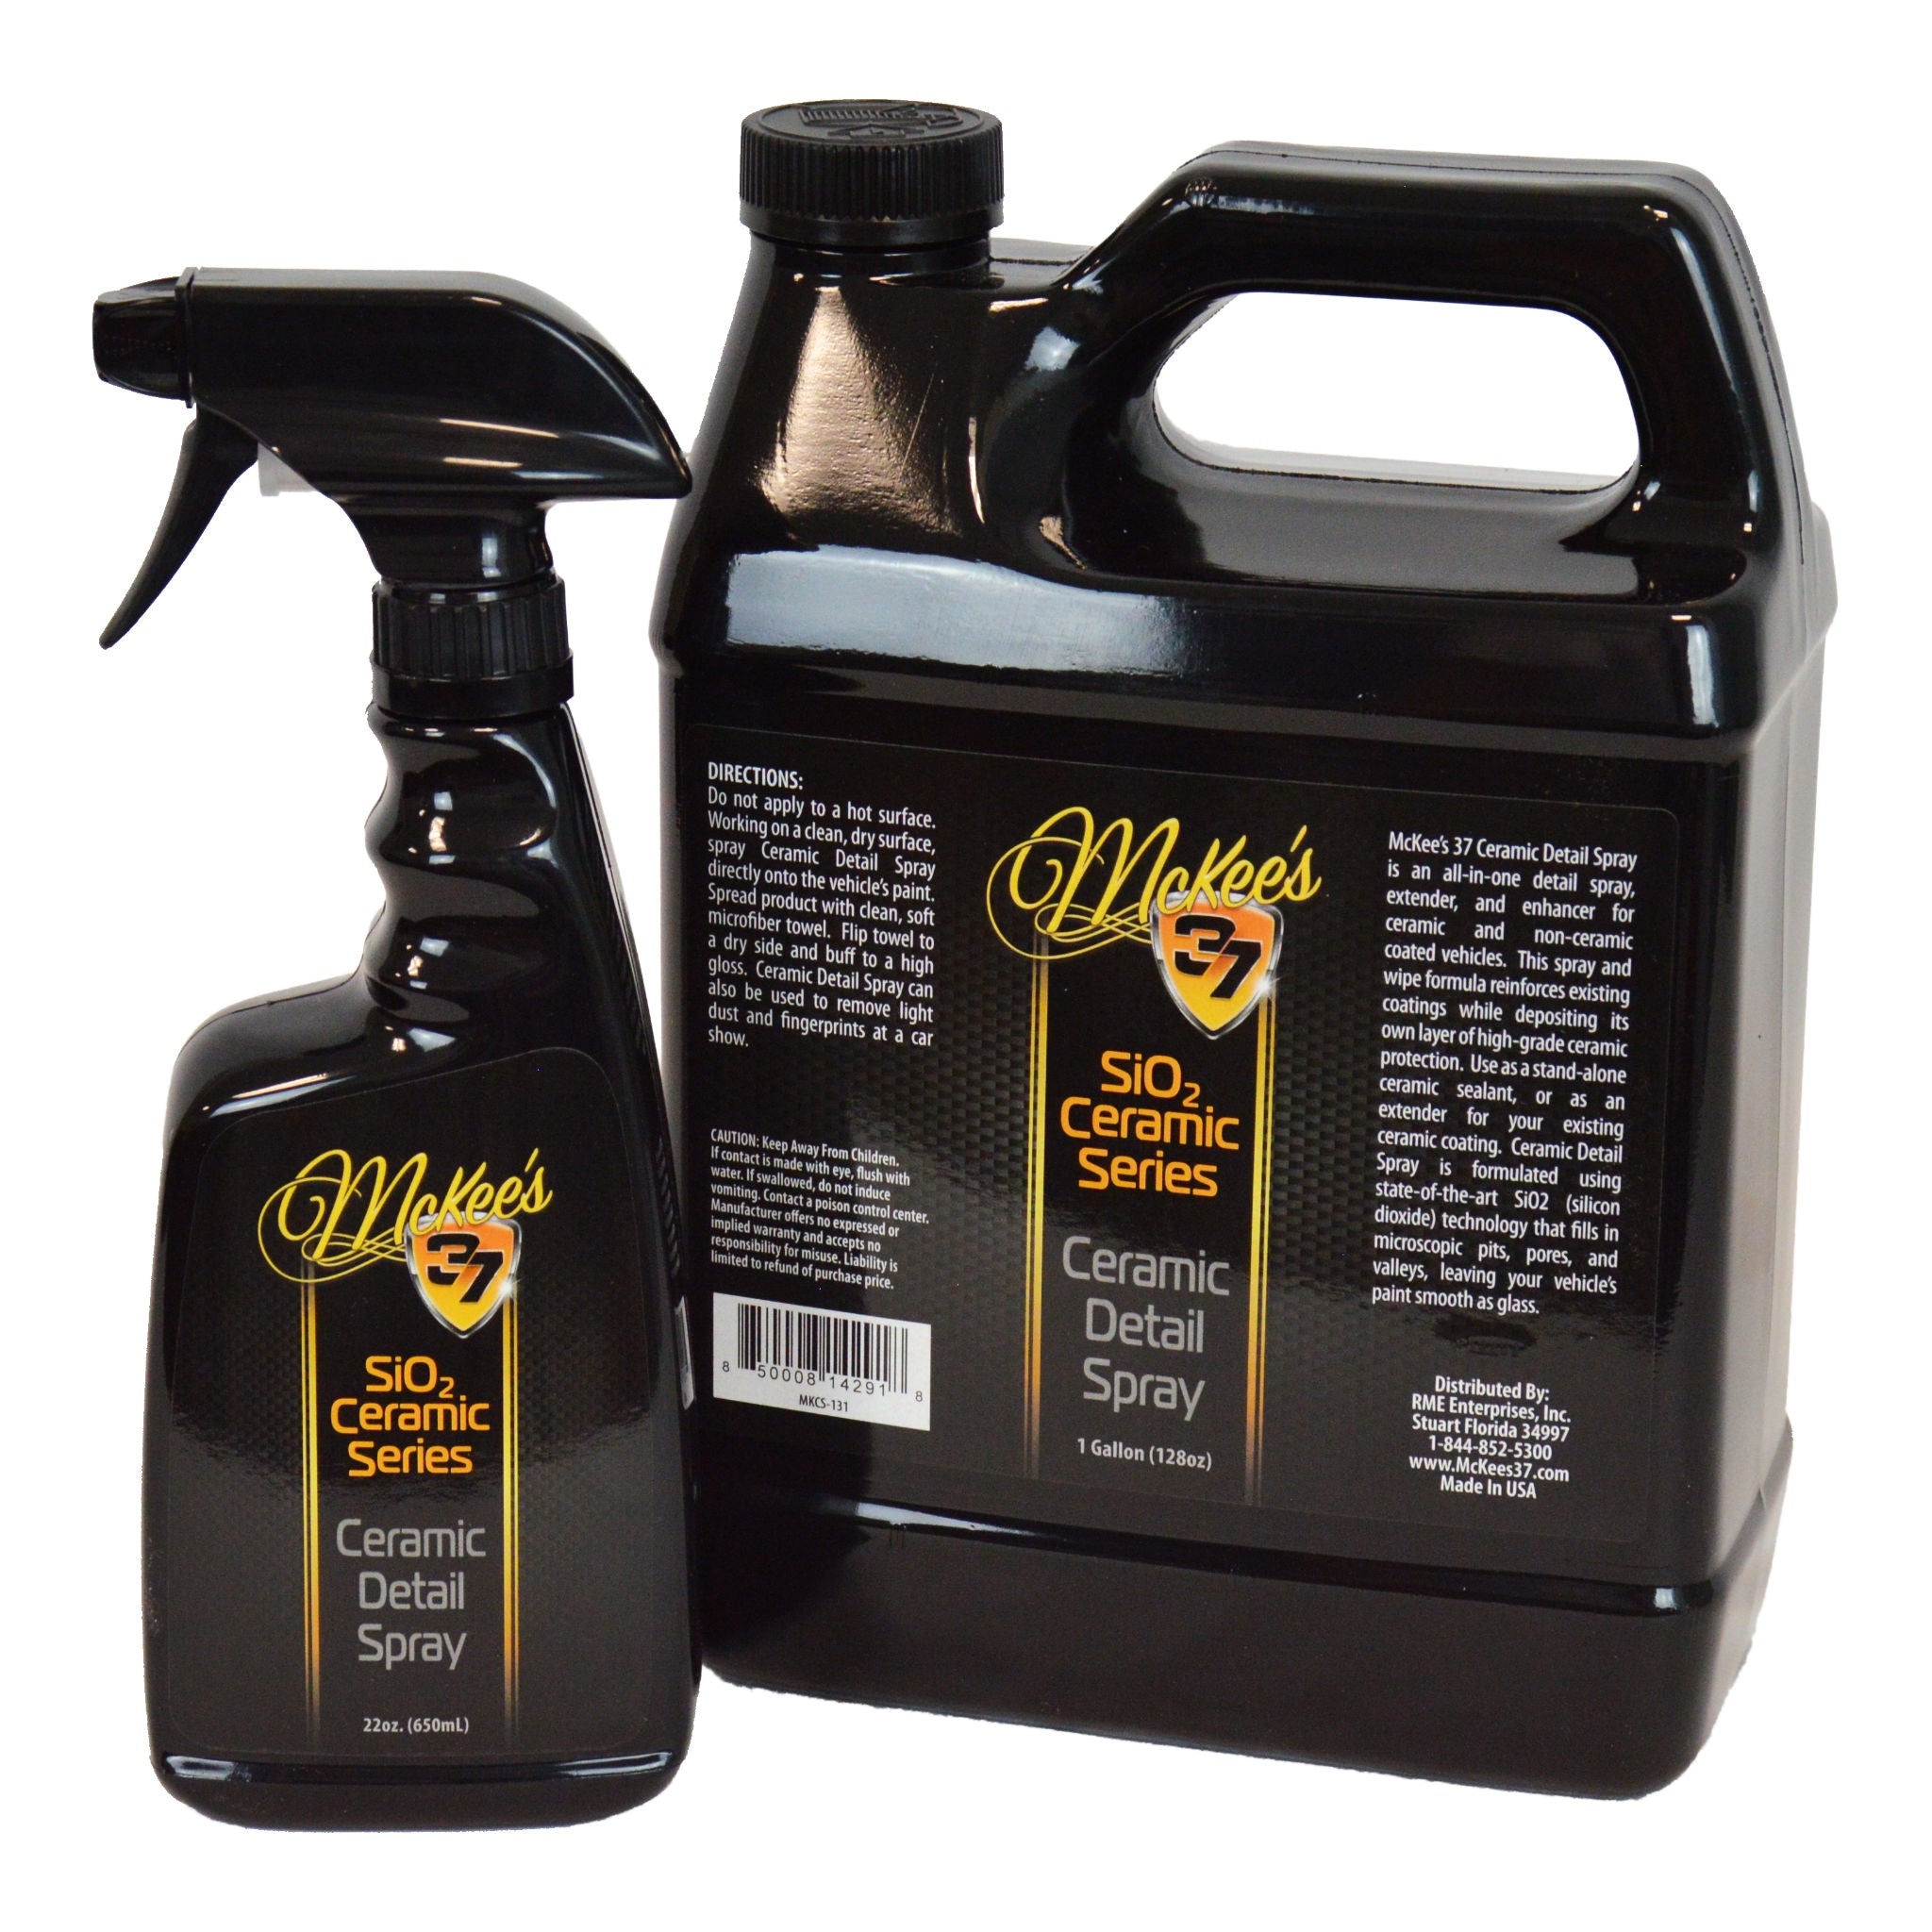 CarPro Release 1 Liter | Ceramic Detail Spray and Post Coating Protectant